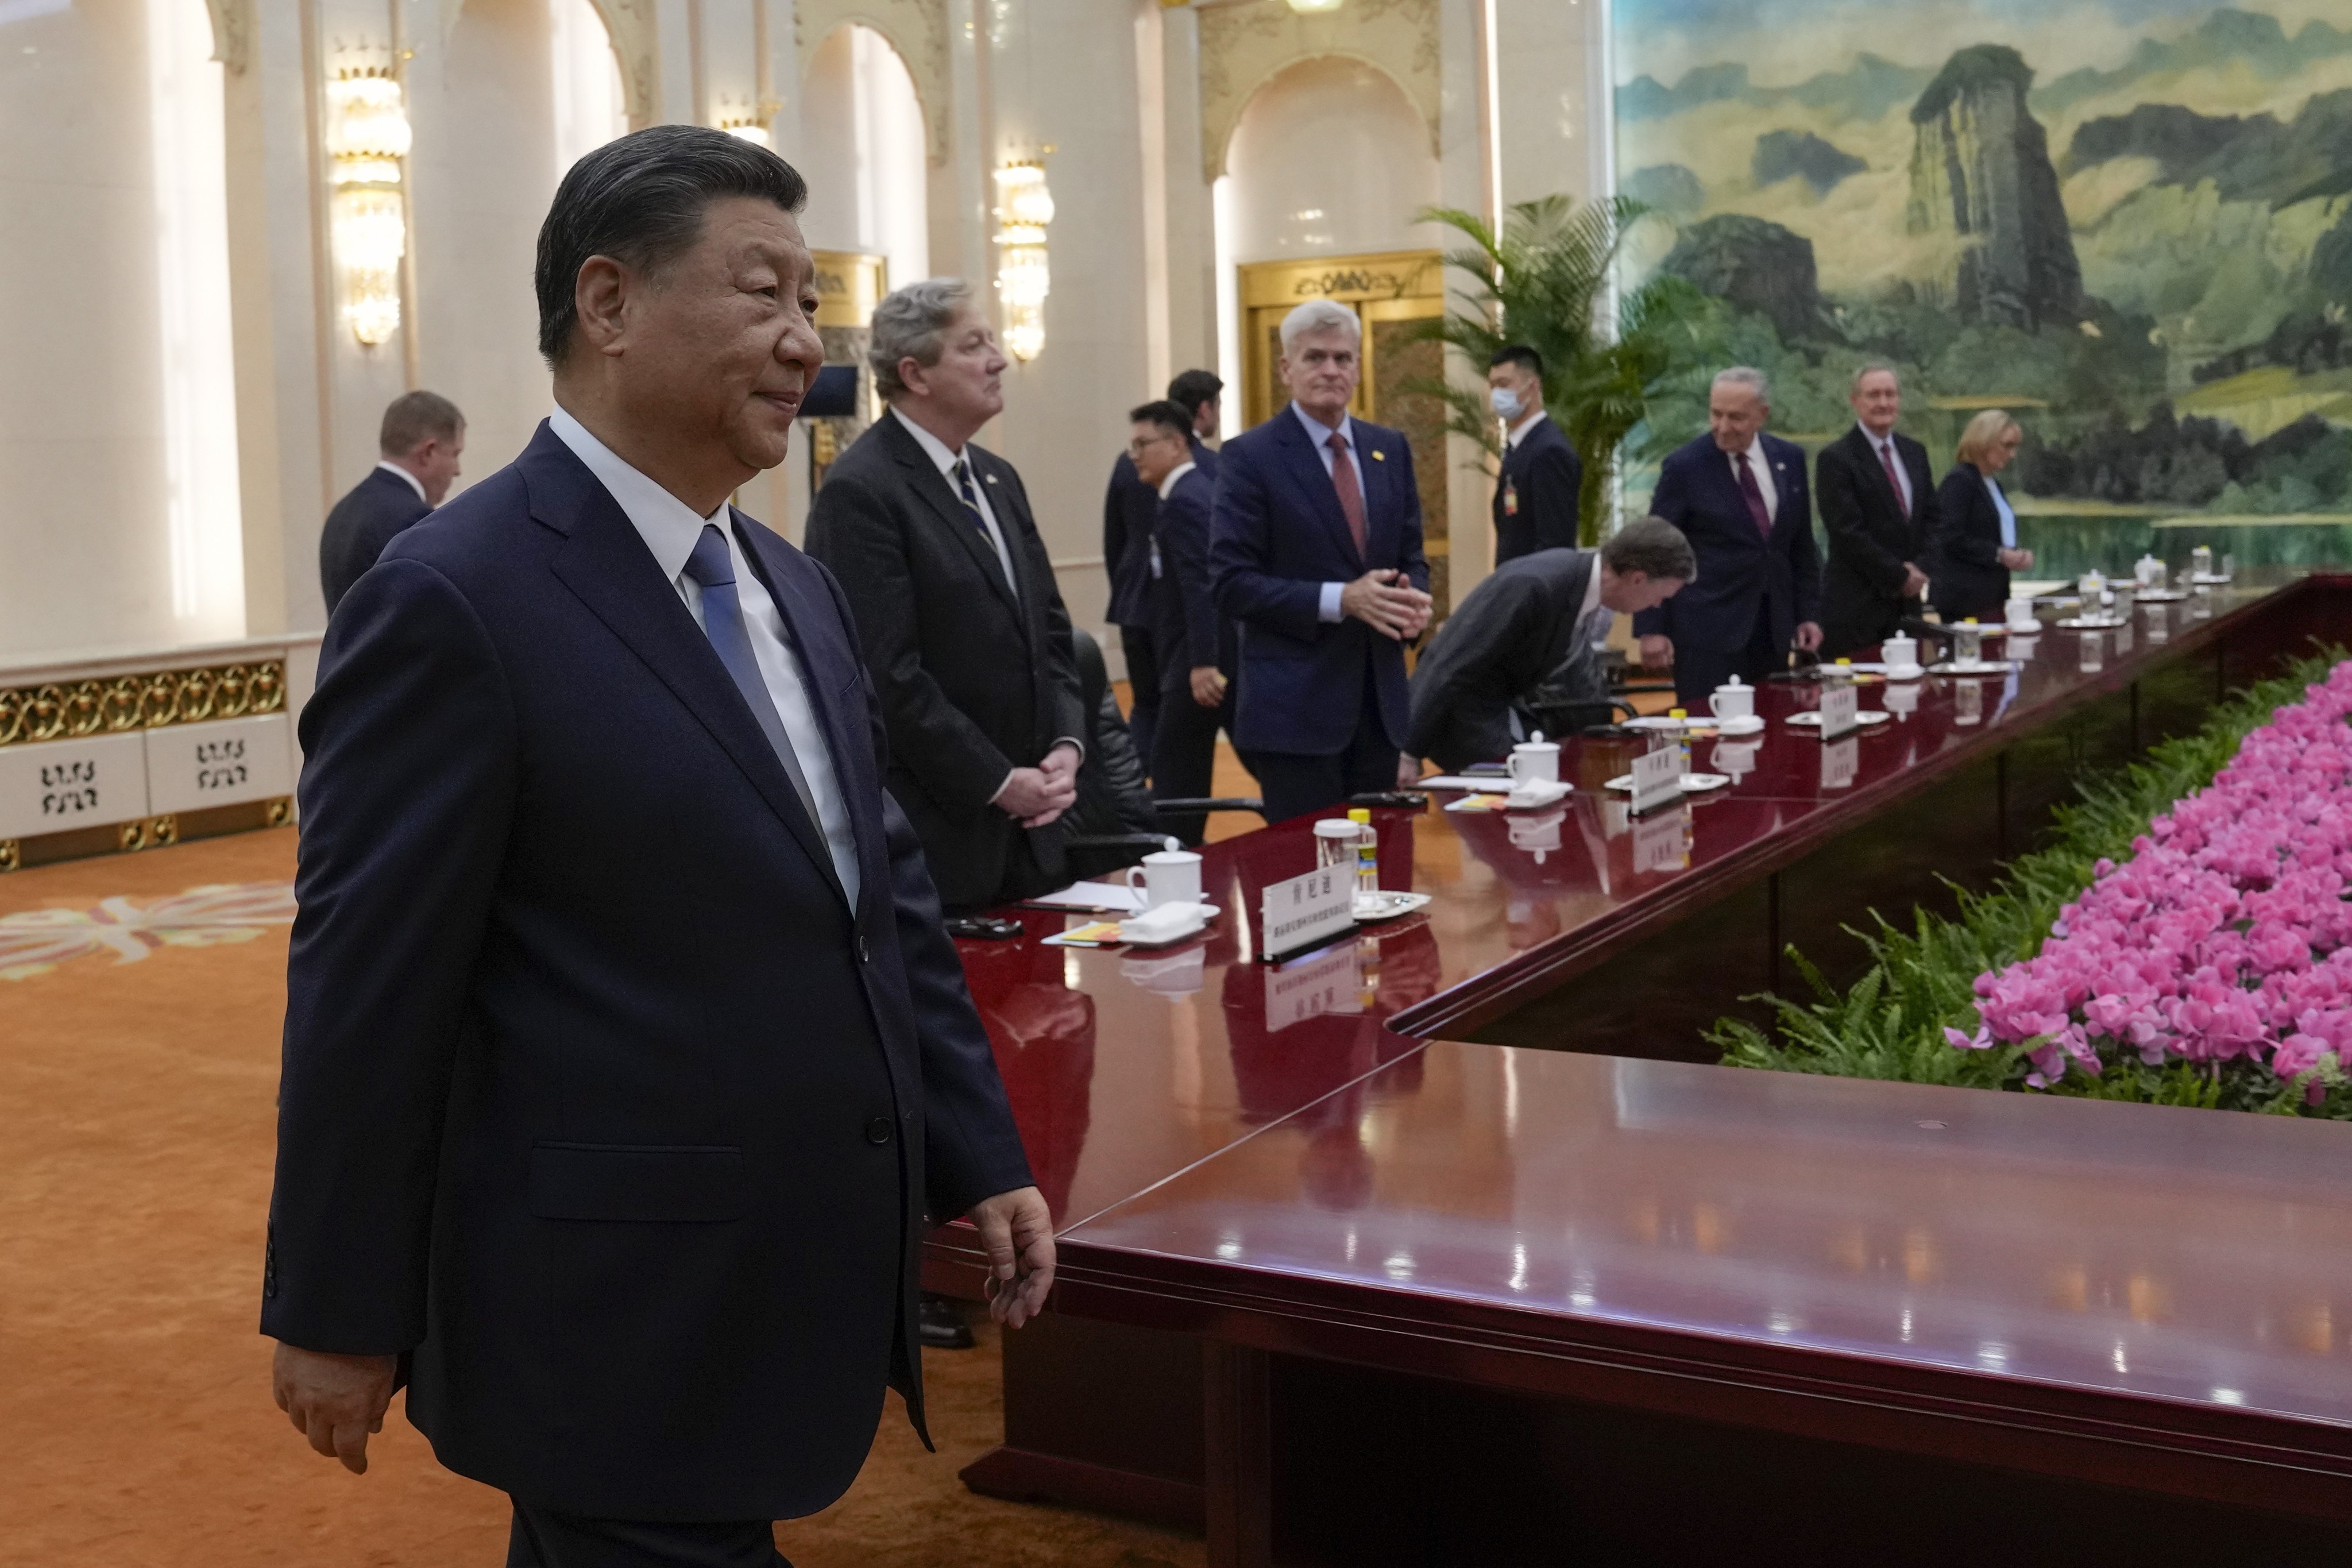 Chinese President Xi Jinping arrives for a meeting with the US congressional delegation, at the Great Hall of the People in Beijing on Monday. Photo: EPA-EFE